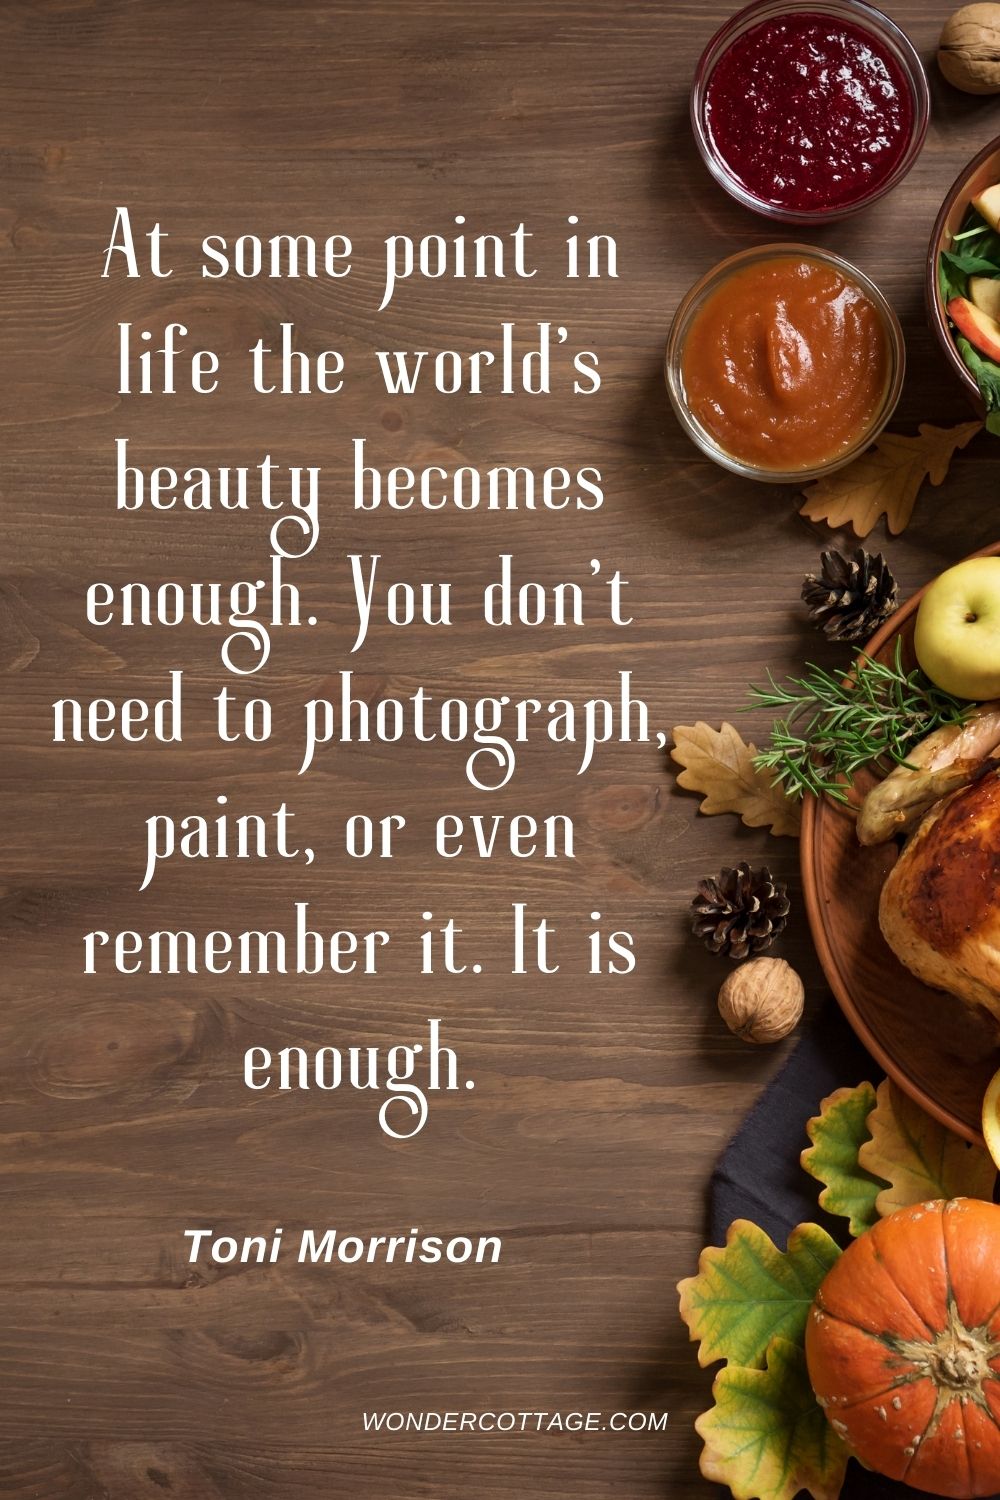 At some point in life the world's beauty becomes enough. You don't need to photograph, paint, or even remember it. It is enough. Toni Morrison